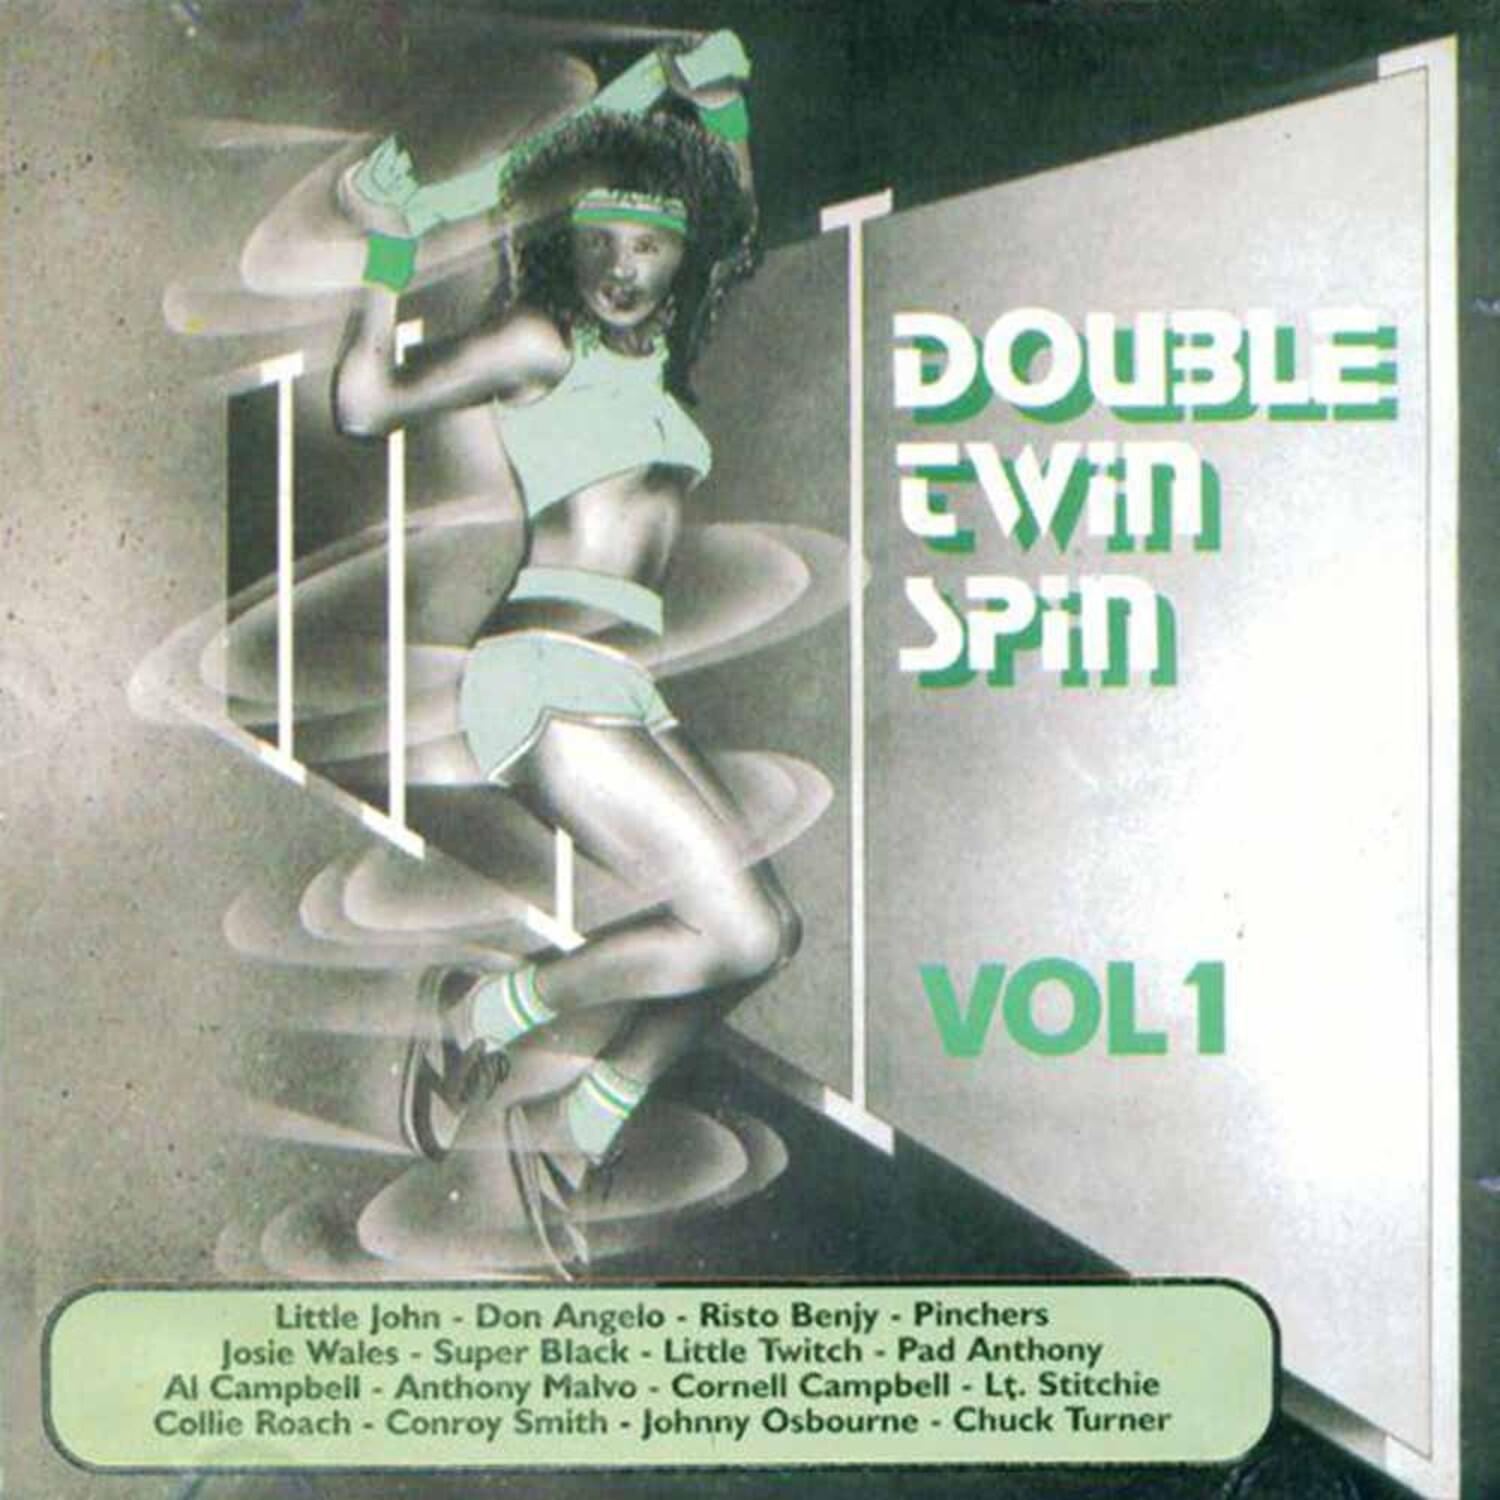 Double Twin Spin Vol.1